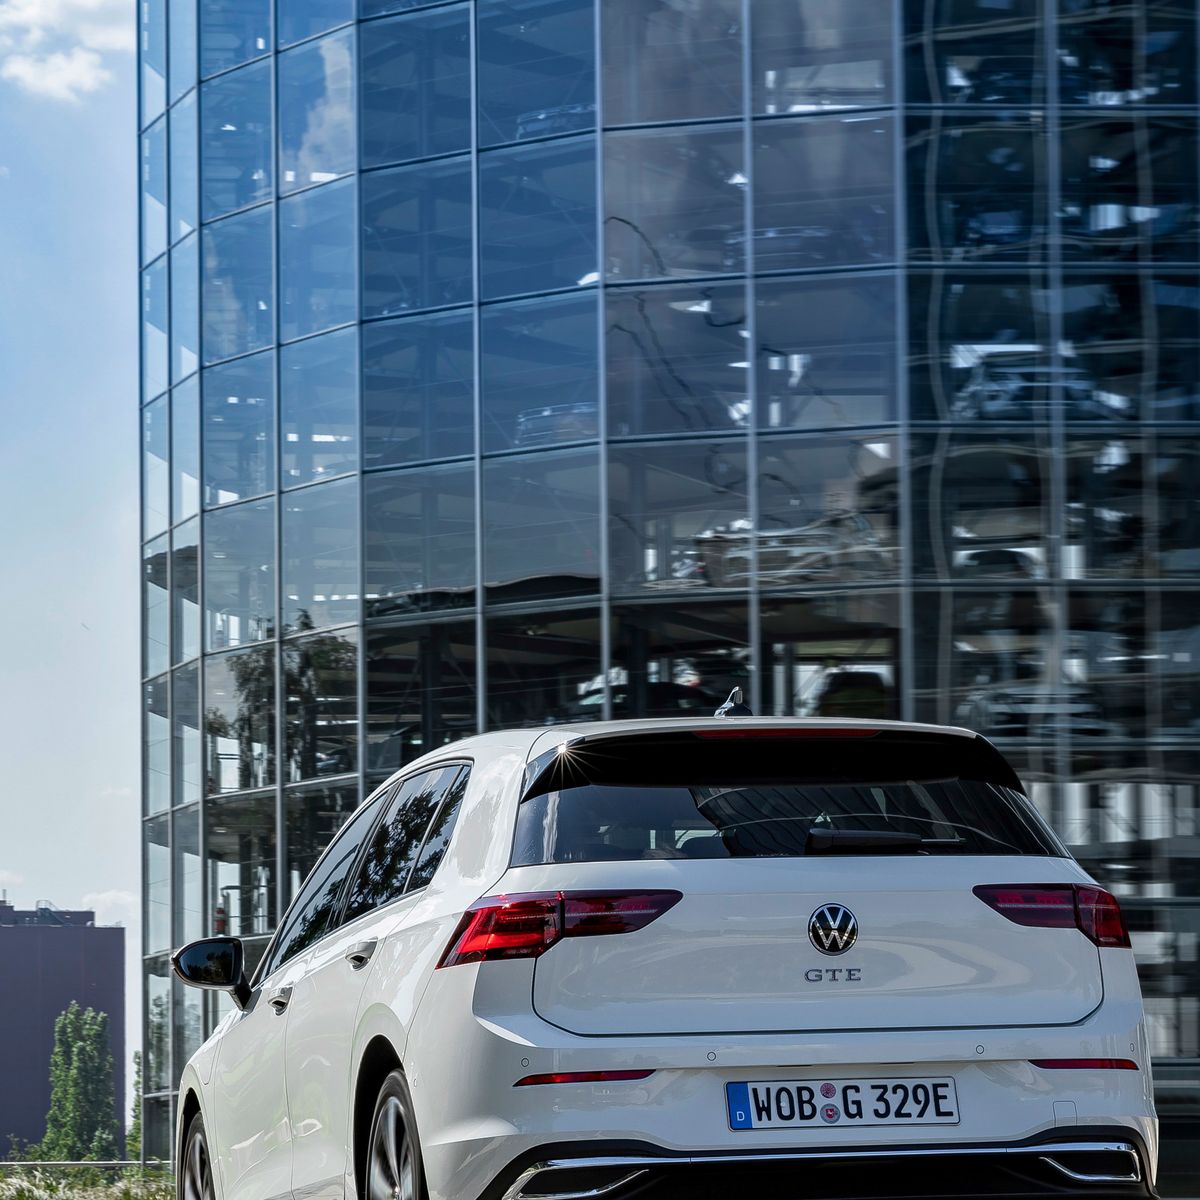 Golf eHybrid and Golf GTE – the plug-in hybrid in detail